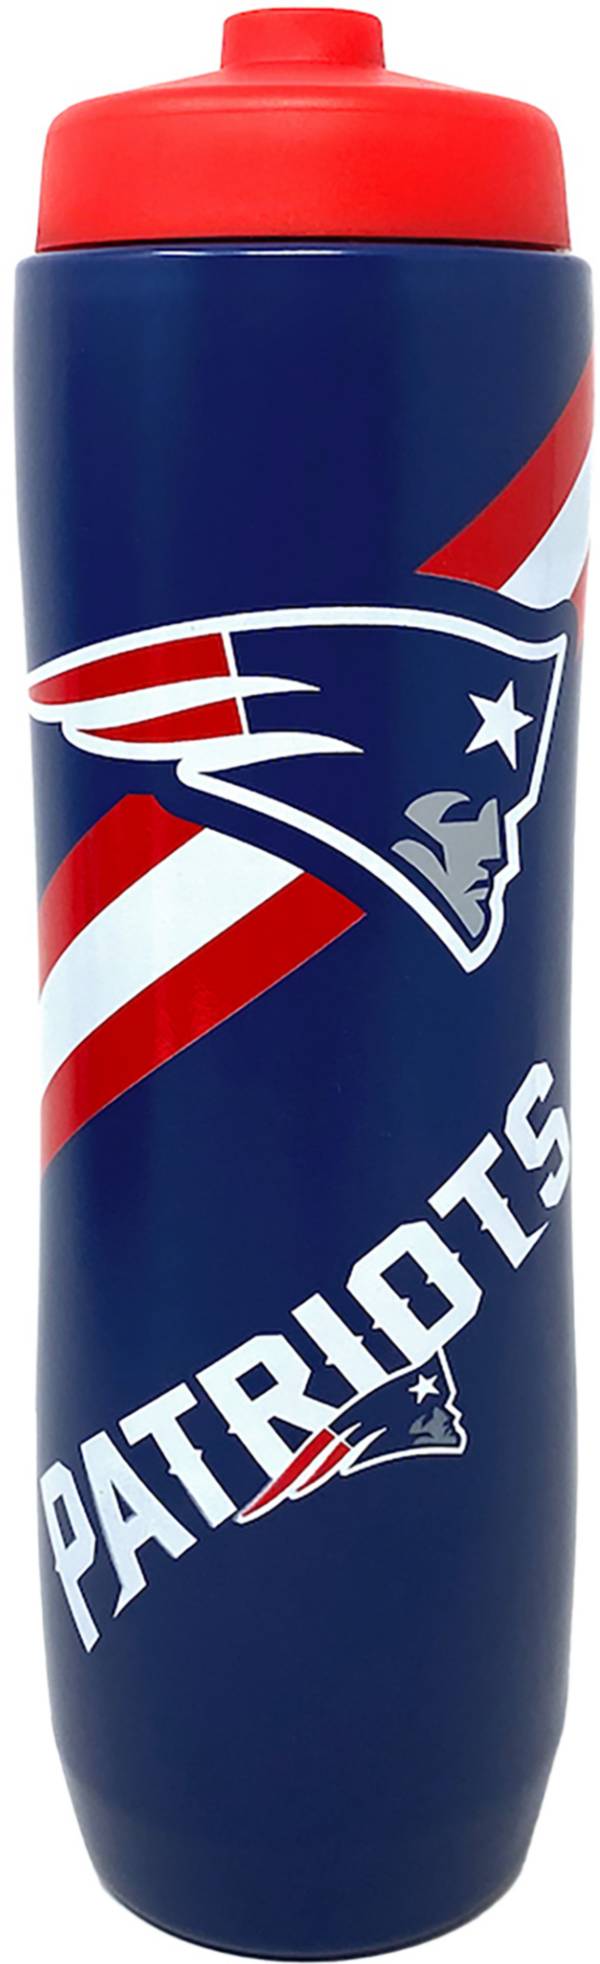 Party Animal New England Patriots 32 oz. Squeeze Water Bottle product image